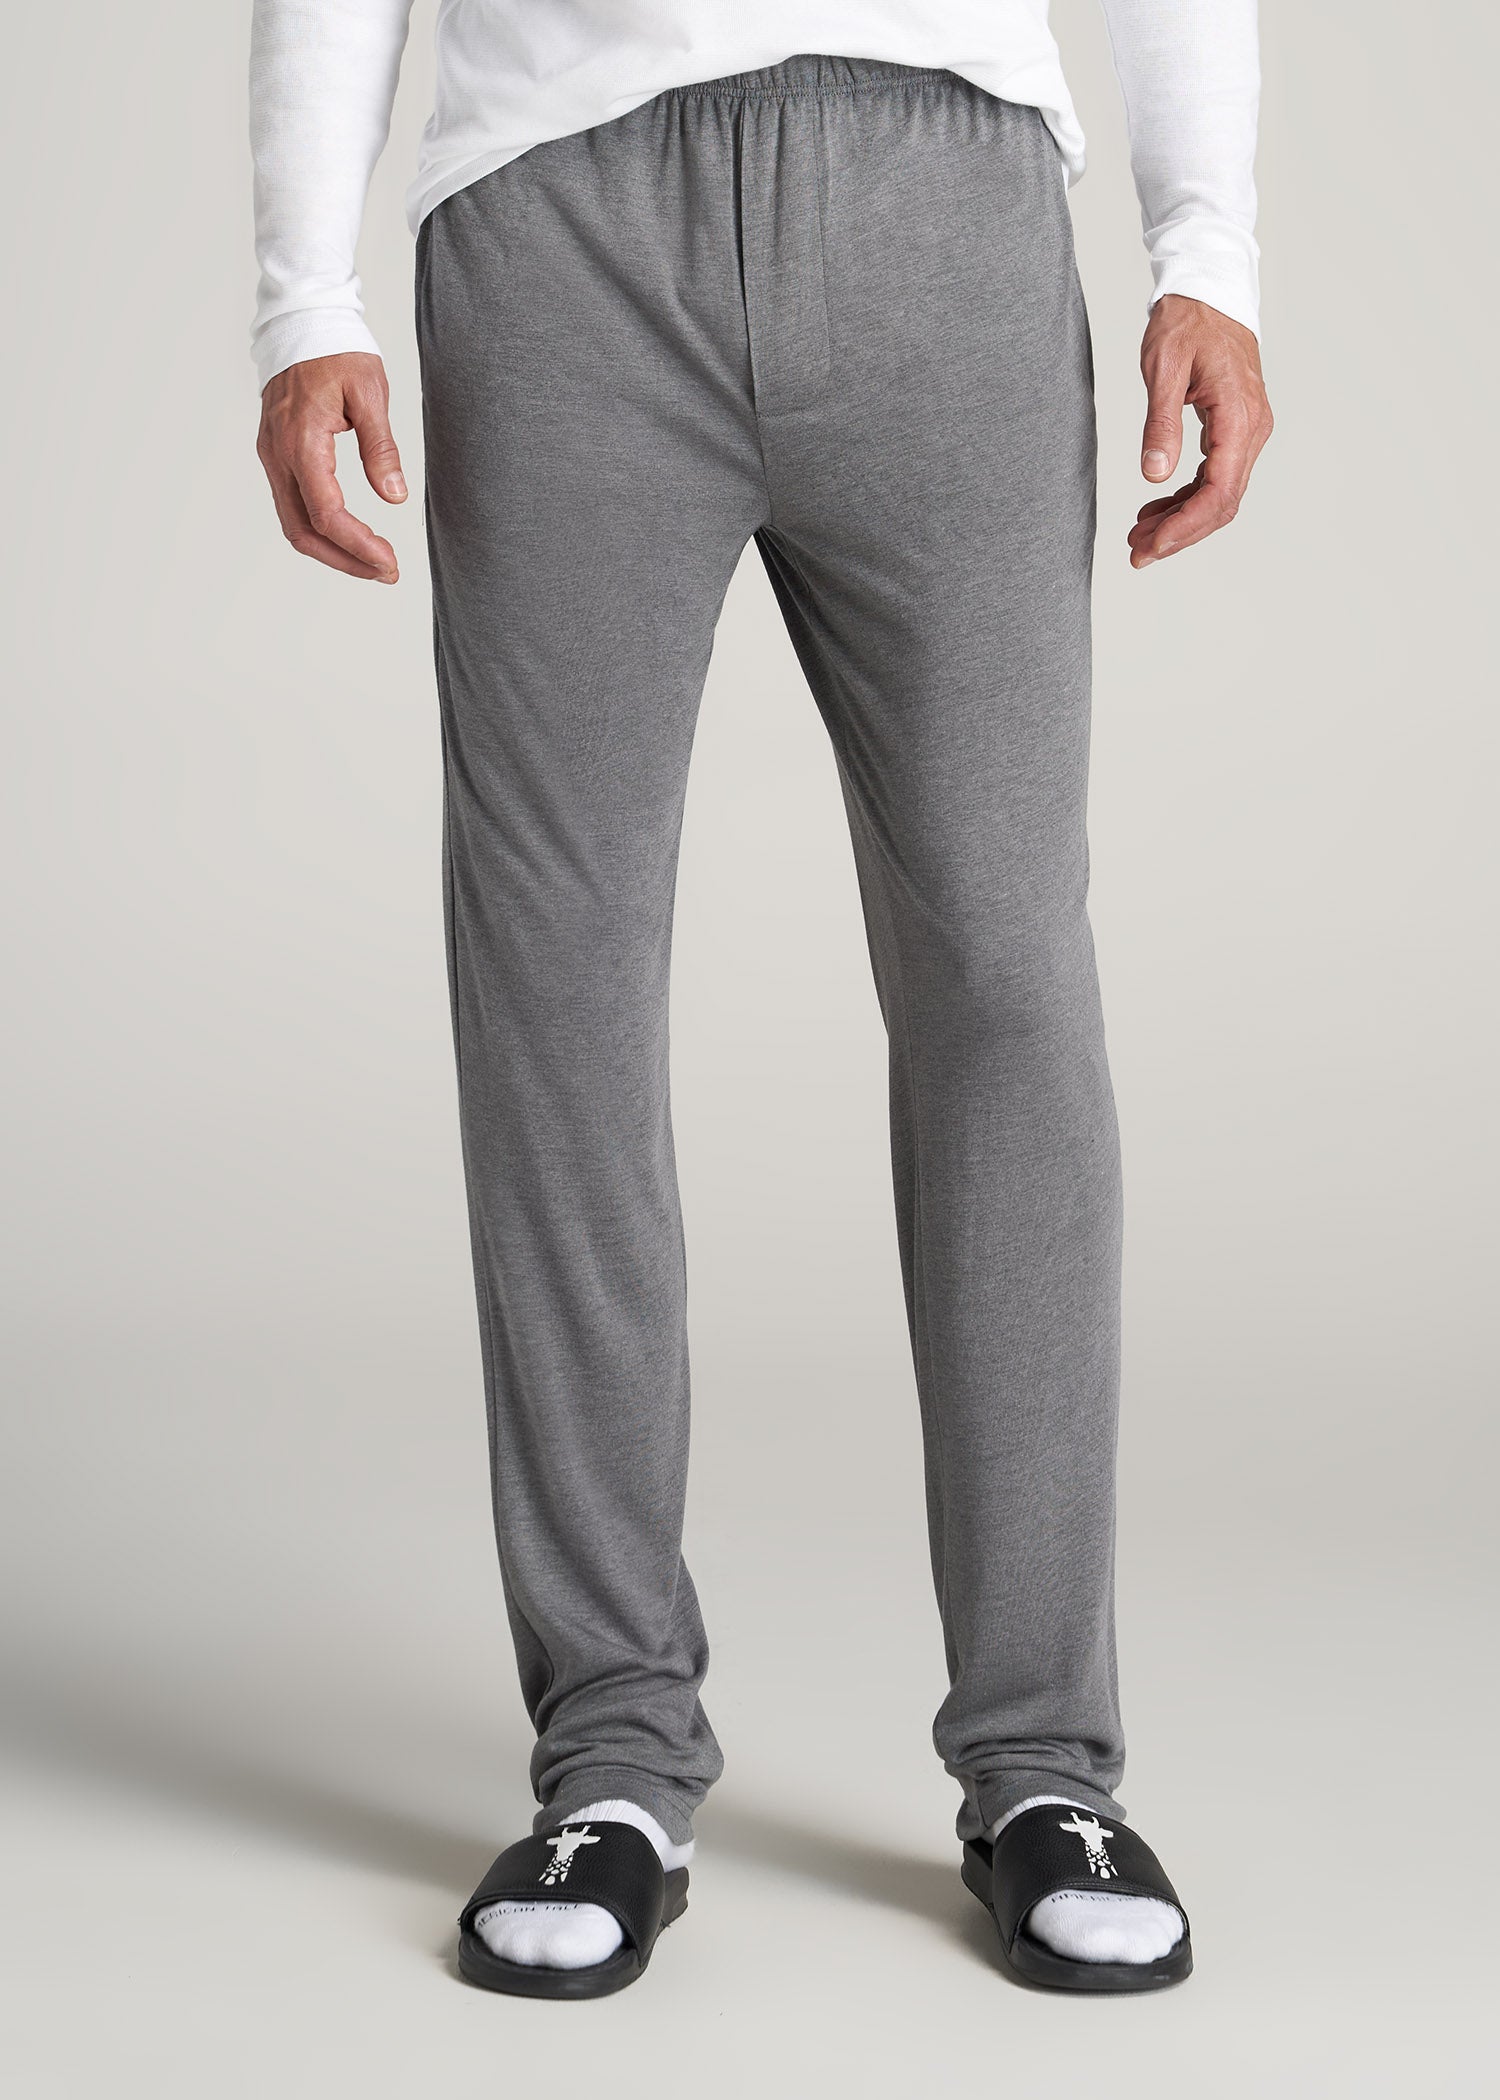 Lounge Pajama Pants for Tall Men in Charcoal Mix